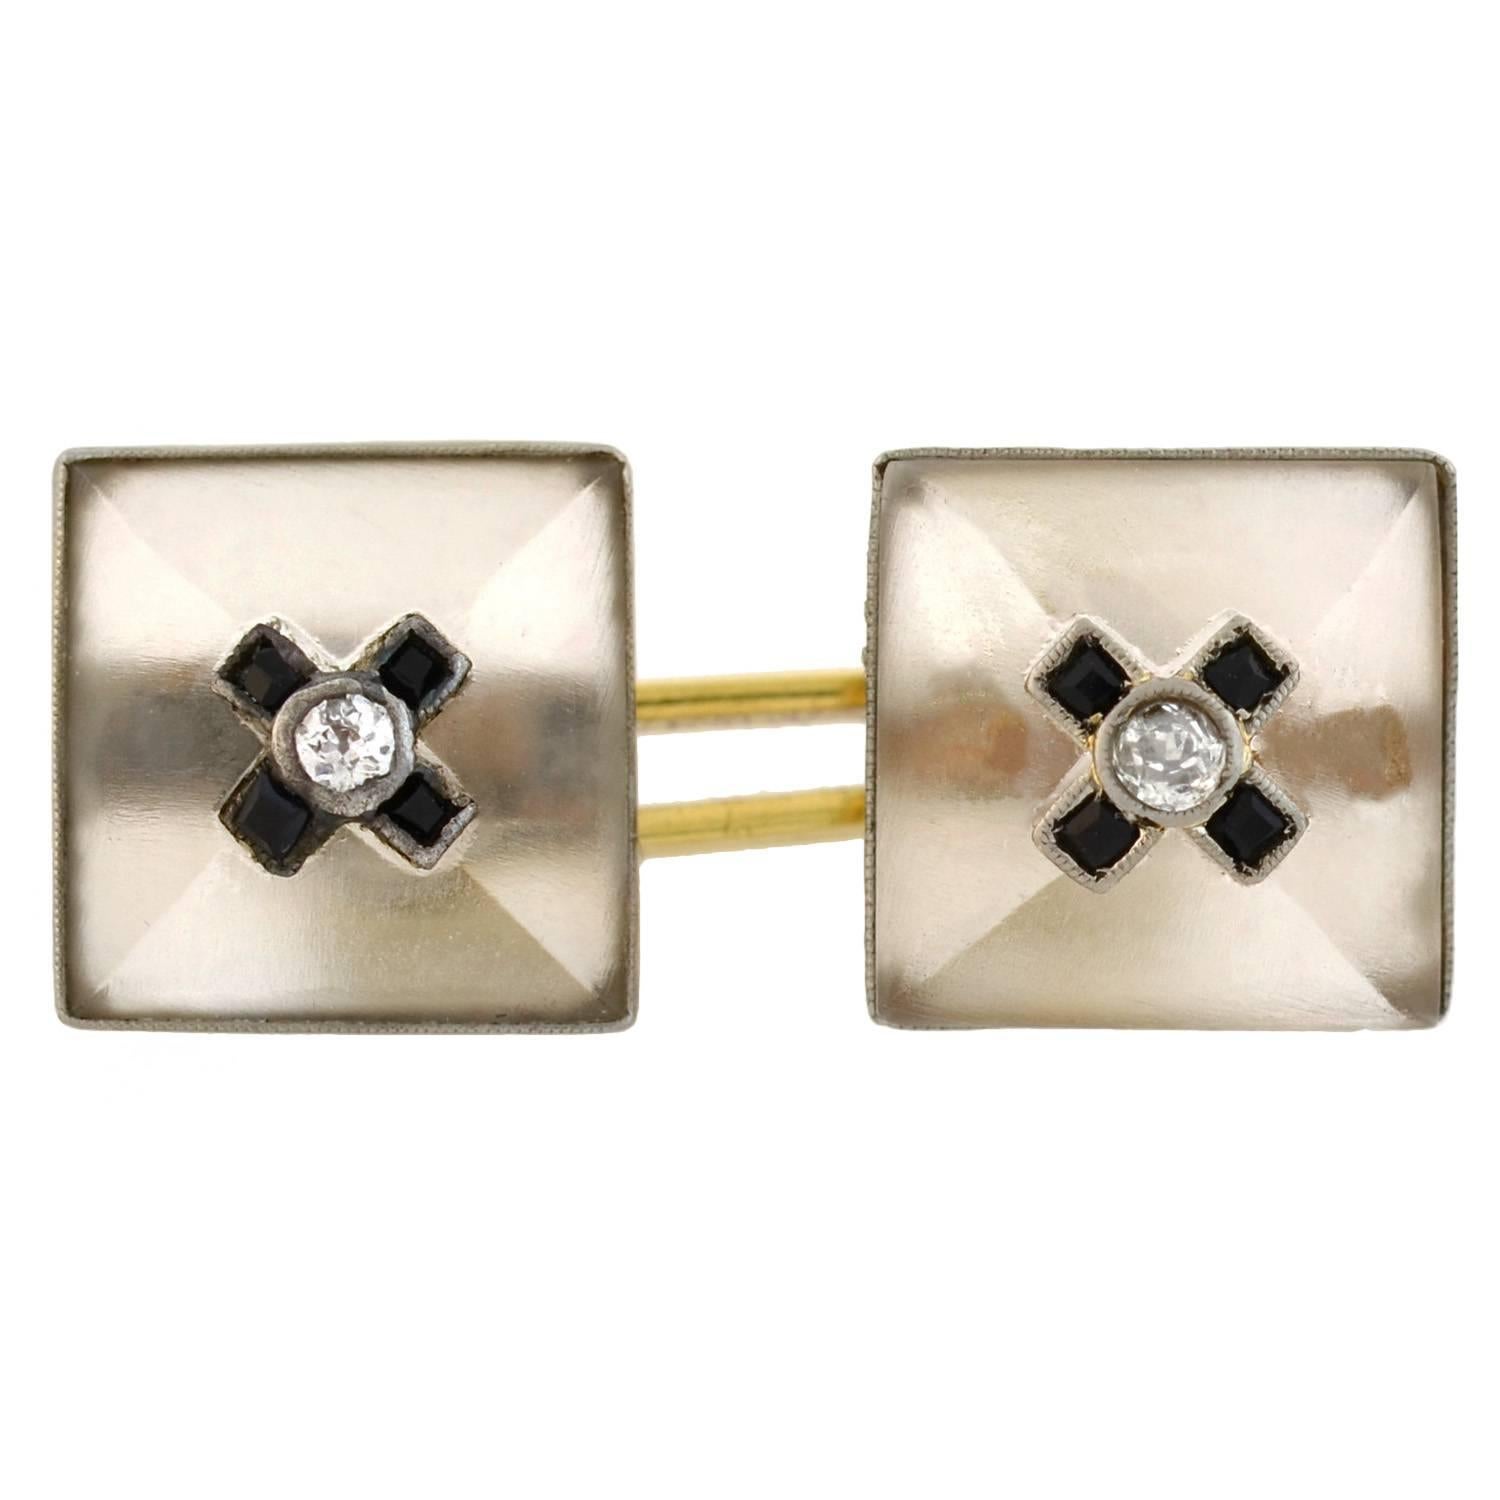 Fabulous double-sided cufflinks from the Art Deco (ca1920) era! Each cufflink is crafted in platinum topped 14kt yellow gold and has two frosted rock quartz crystal faces which are square in shape. The rock crystal plaques have a 3-dimensional